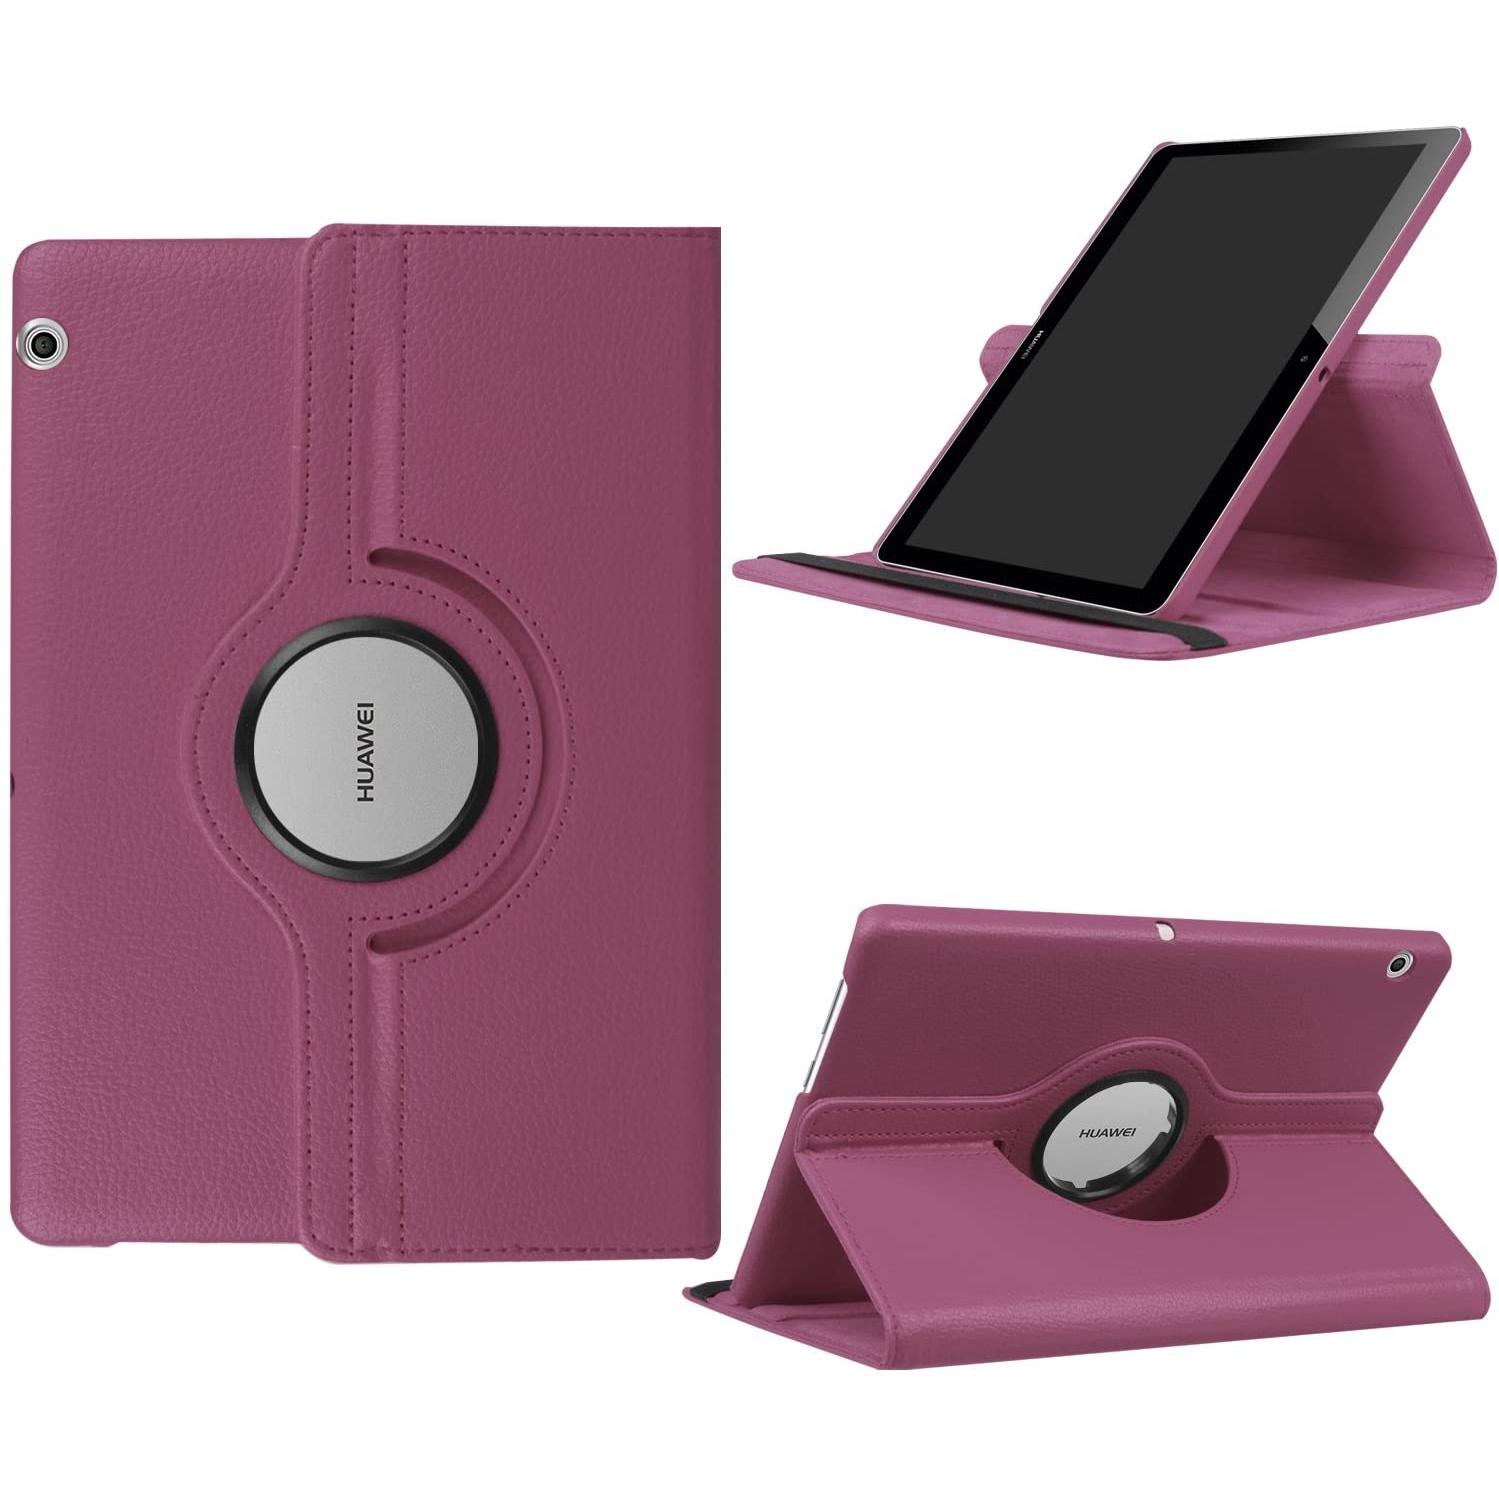 TopSave 360 Degree Rotating Tablet Case Cover For Huawei MediaPad T3, Purple